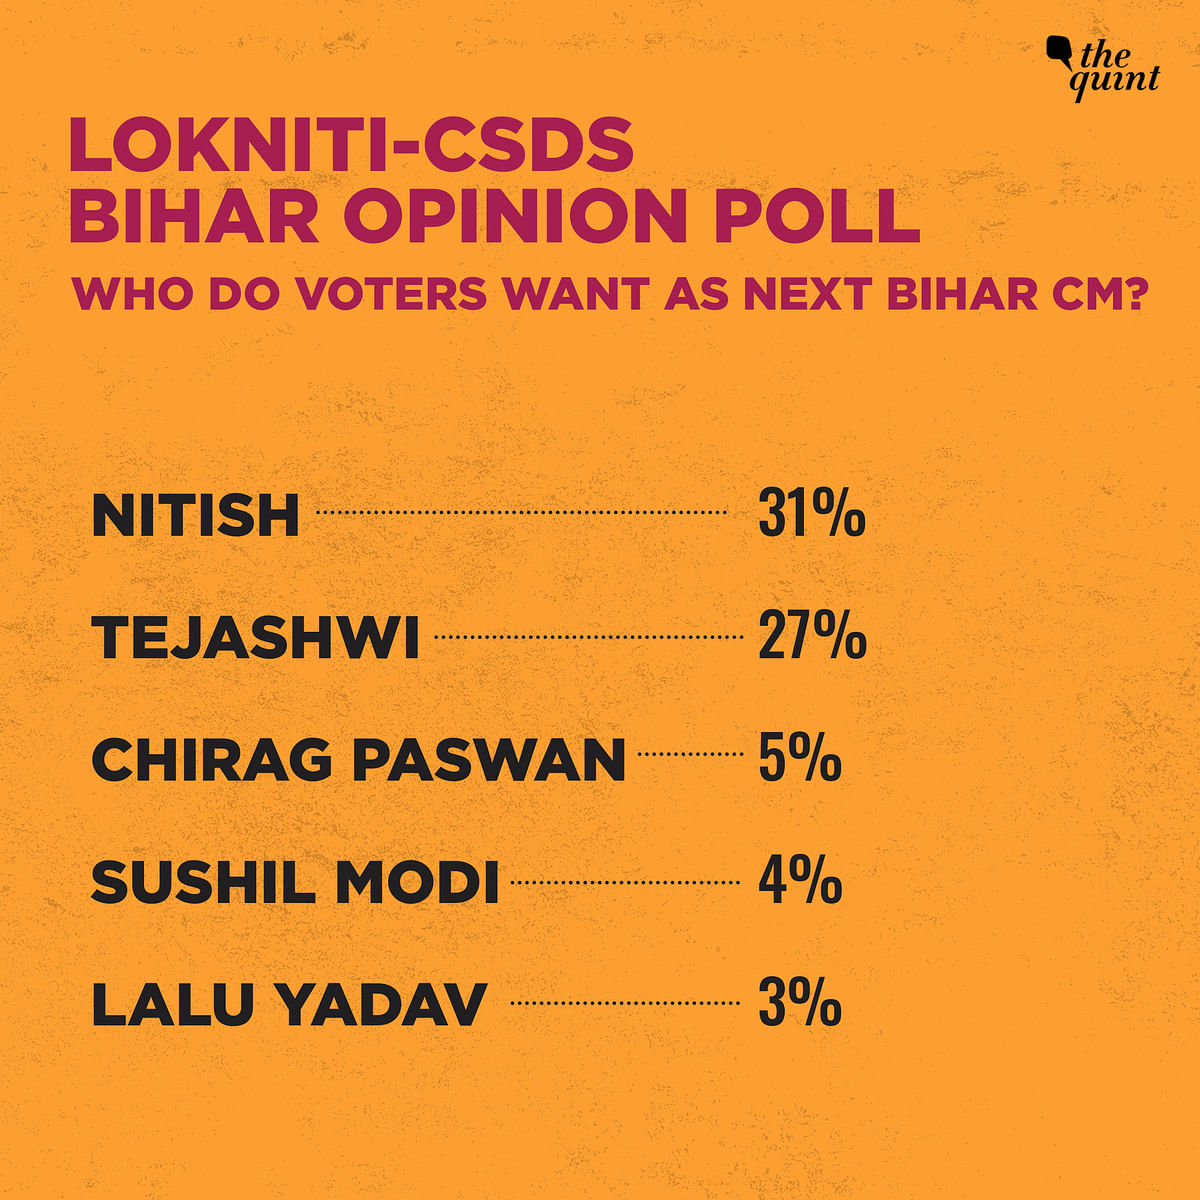 In 2020, only 52% are satisfied with the functioning of Nitish’s government, as opposed to nearly 80% in 2015.